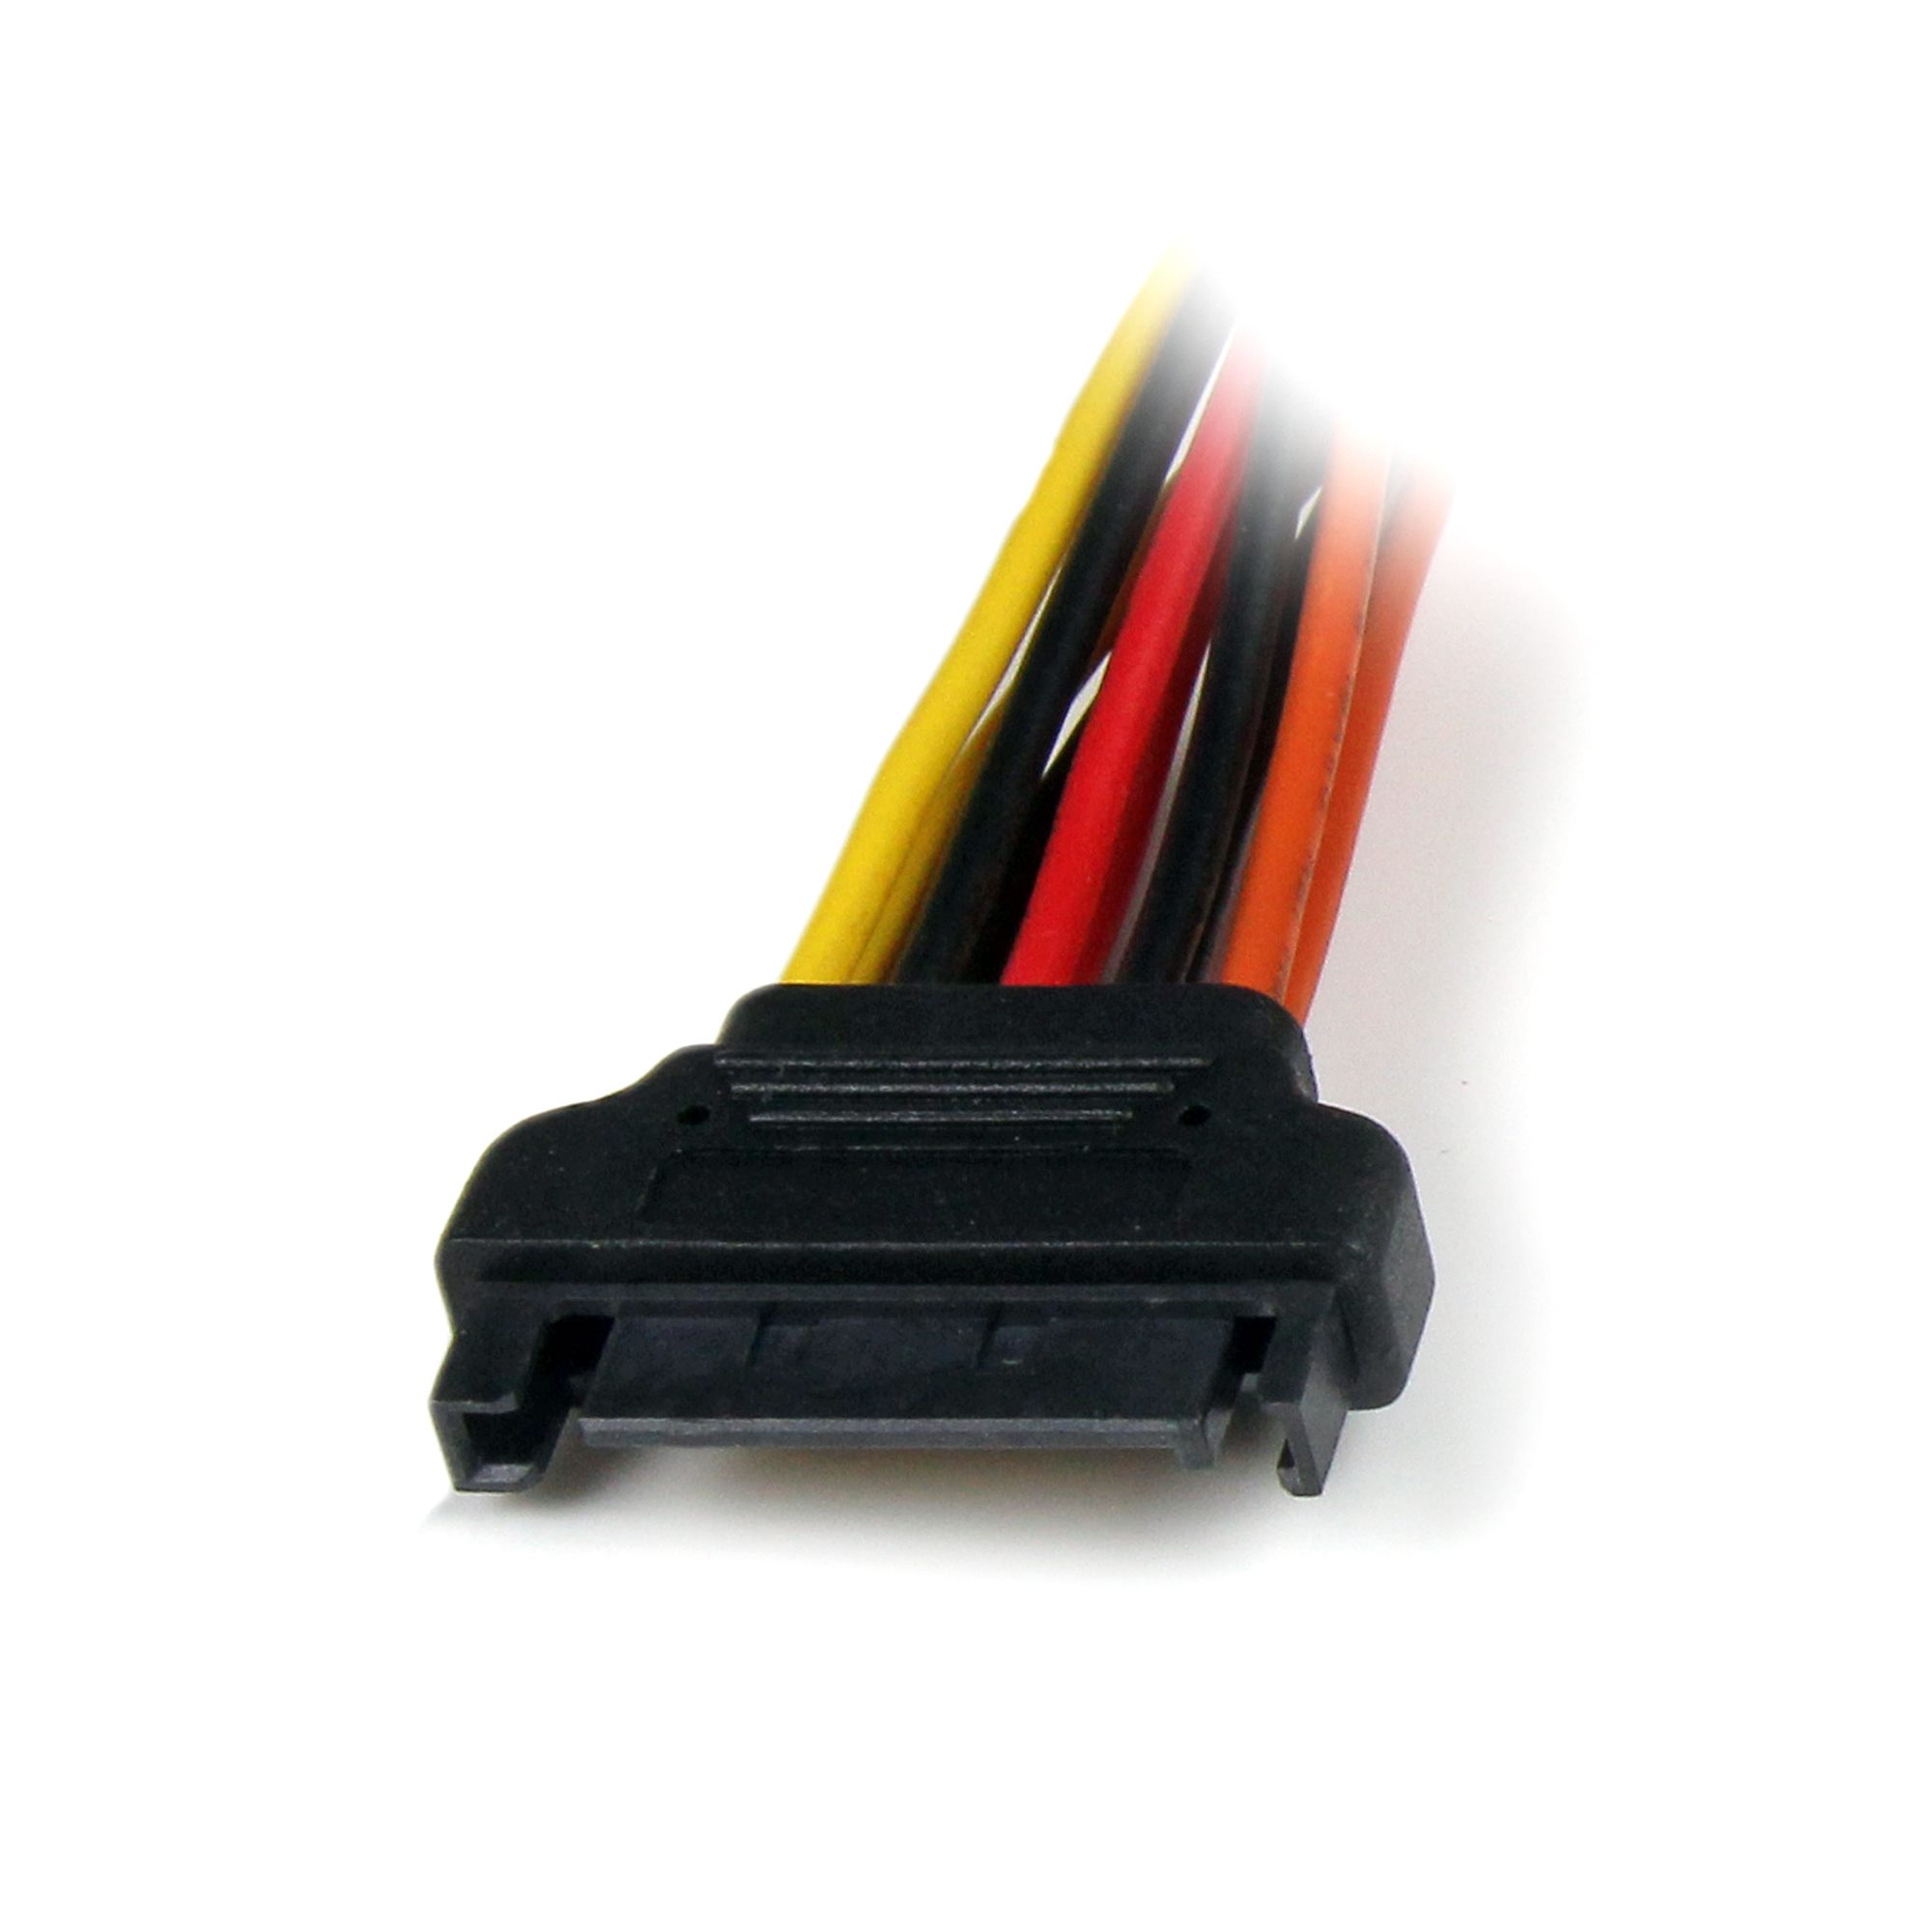 6in SATA Power Y Splitter Cable Adapter – M/F – BCI Imaging Supplies